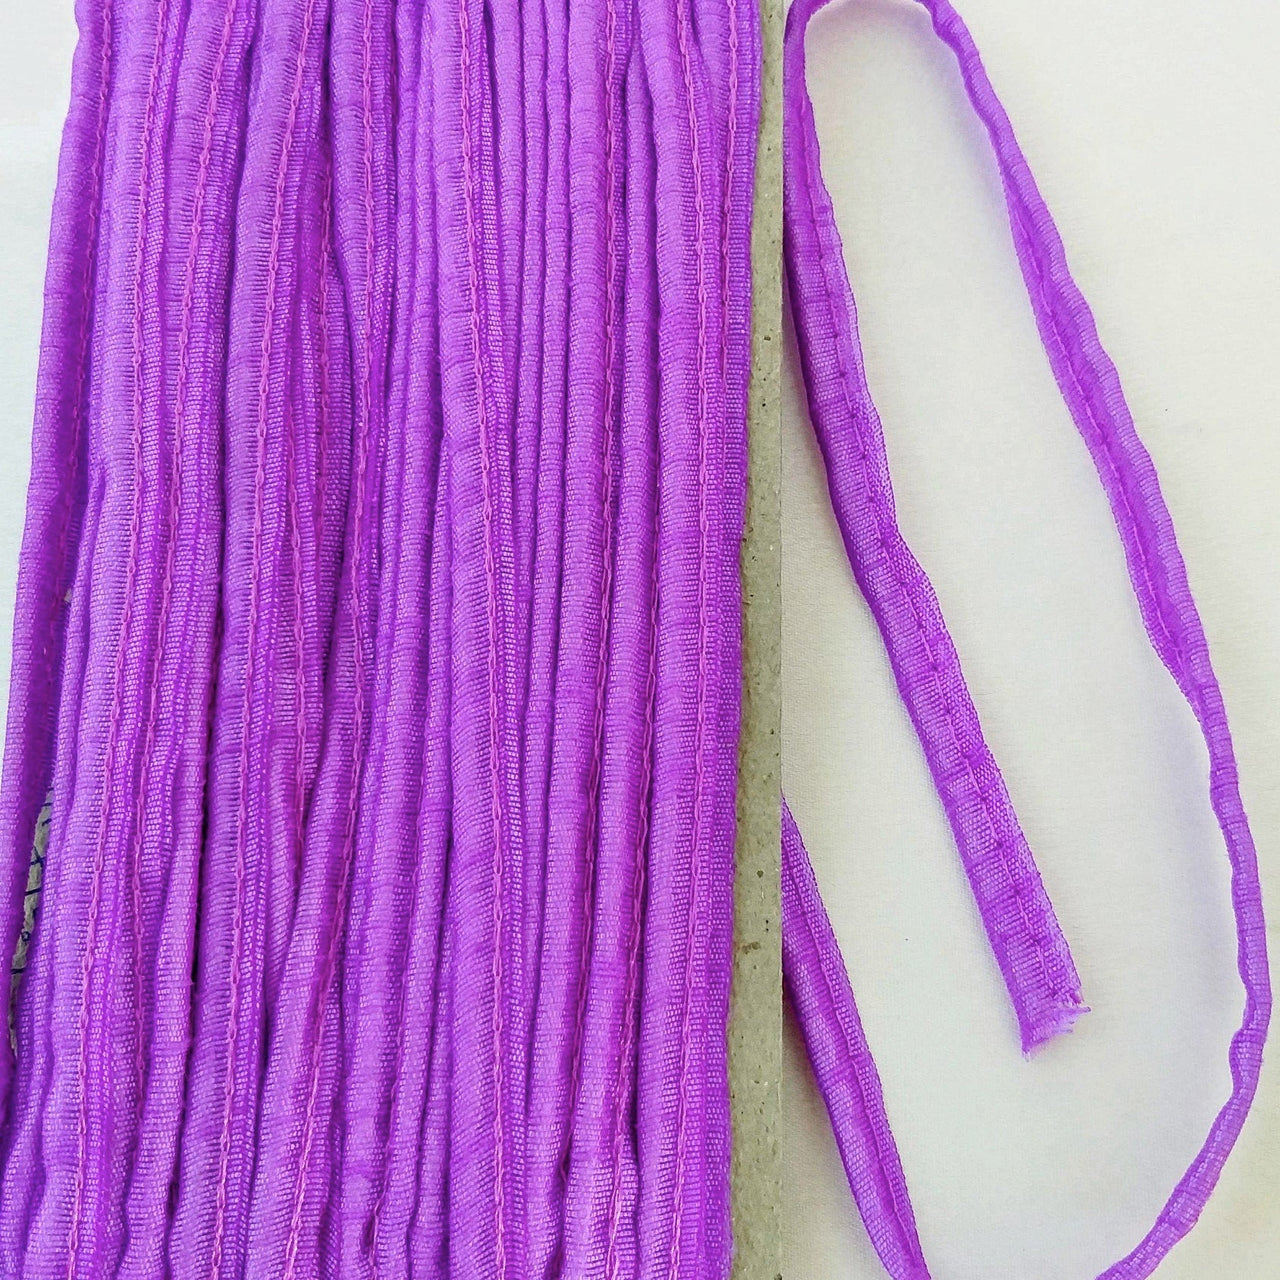 2mm Flanged Insertion Piping on 9mm Band, Violet Purple Art Silk Fabric Trim, Cord piping Trim